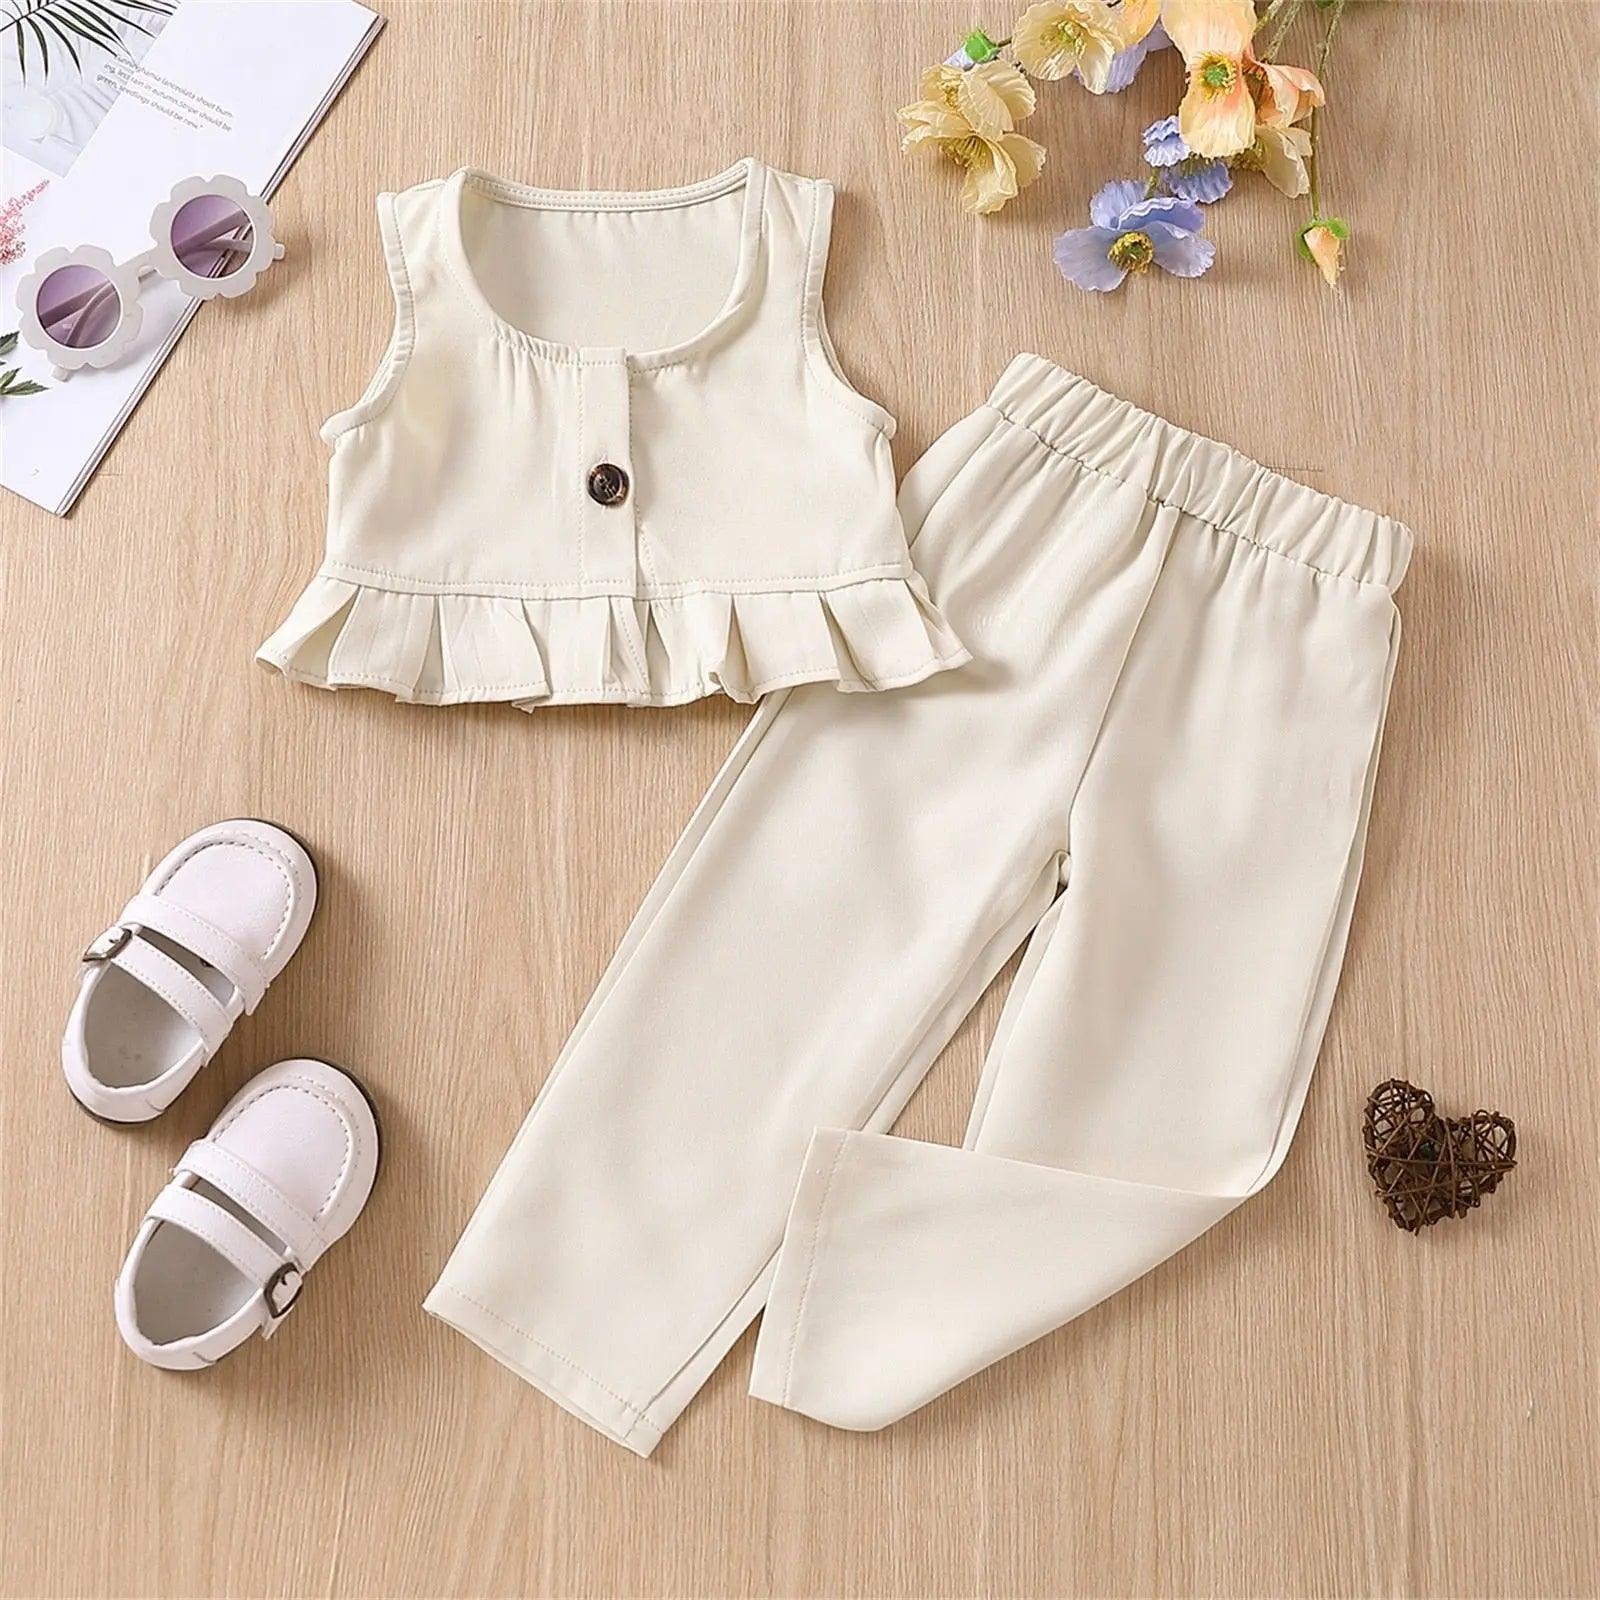 Girls Summer Sleeveless Ruffled Dressy Crop Top and Pants Set Bling Bling Baby Boutique